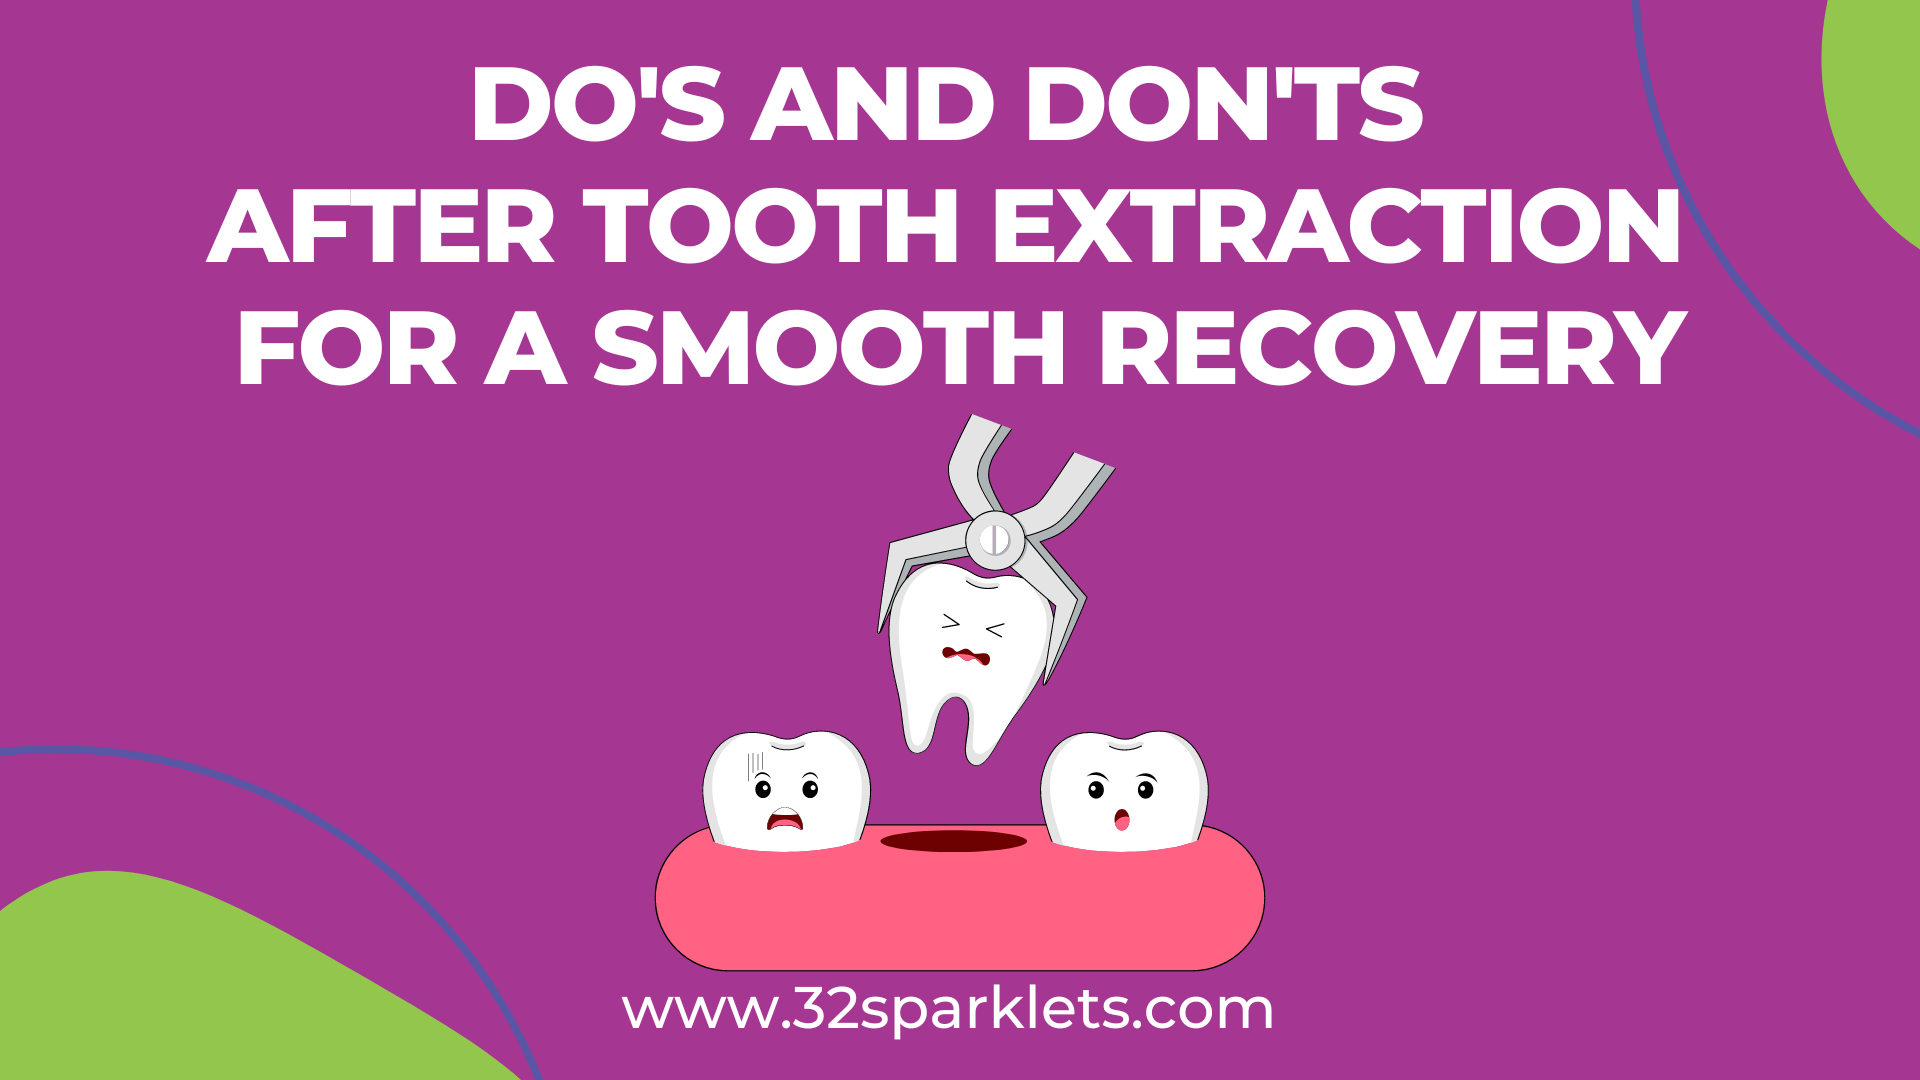 Do's and Don'ts after tooth extraction for a smooth recovery